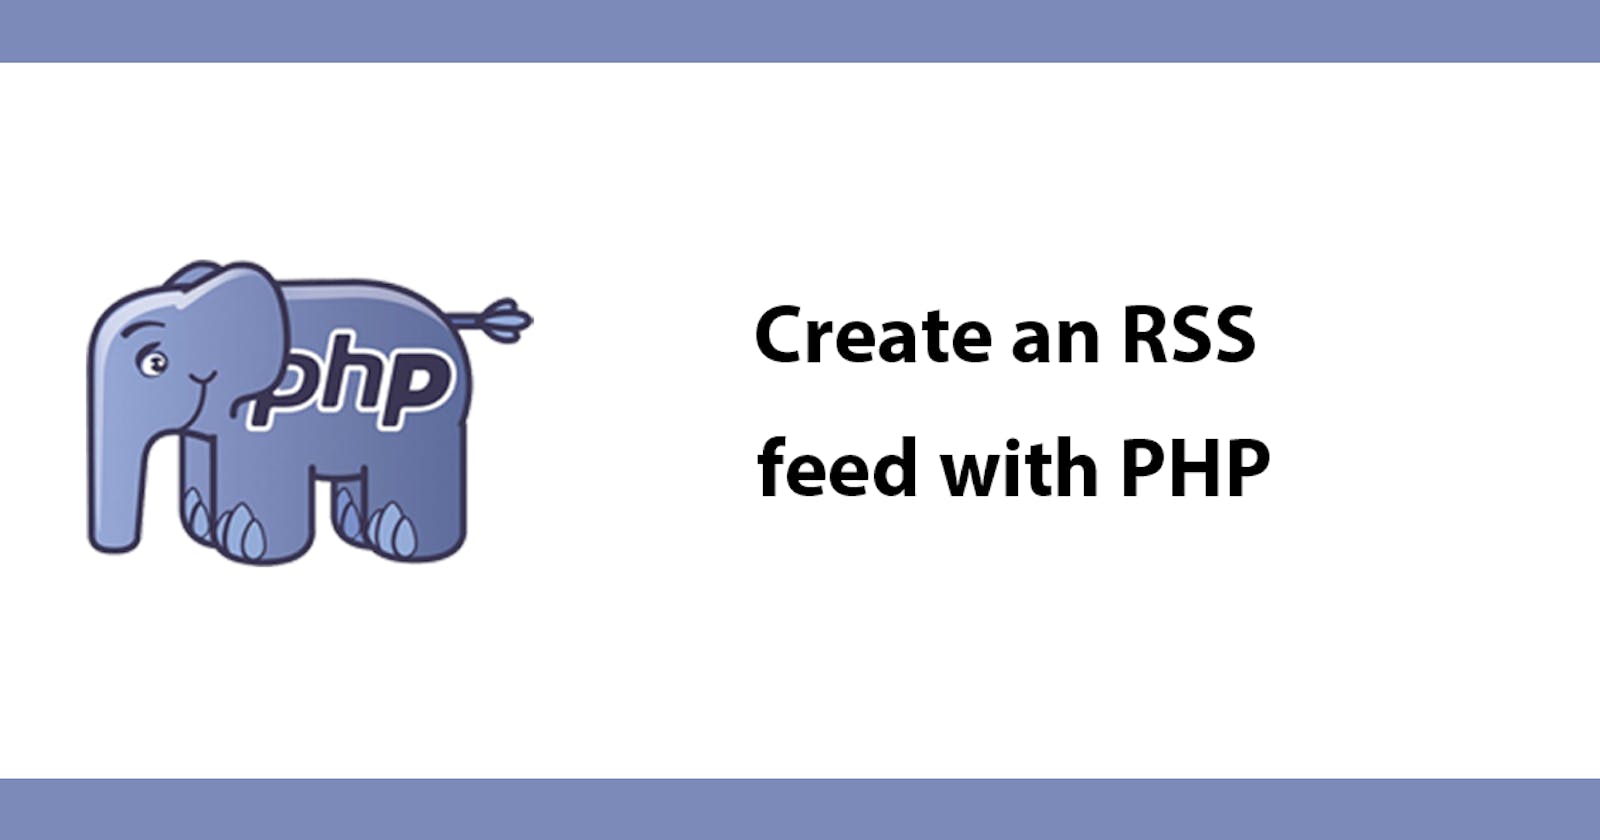 Create an RSS feed with PHP